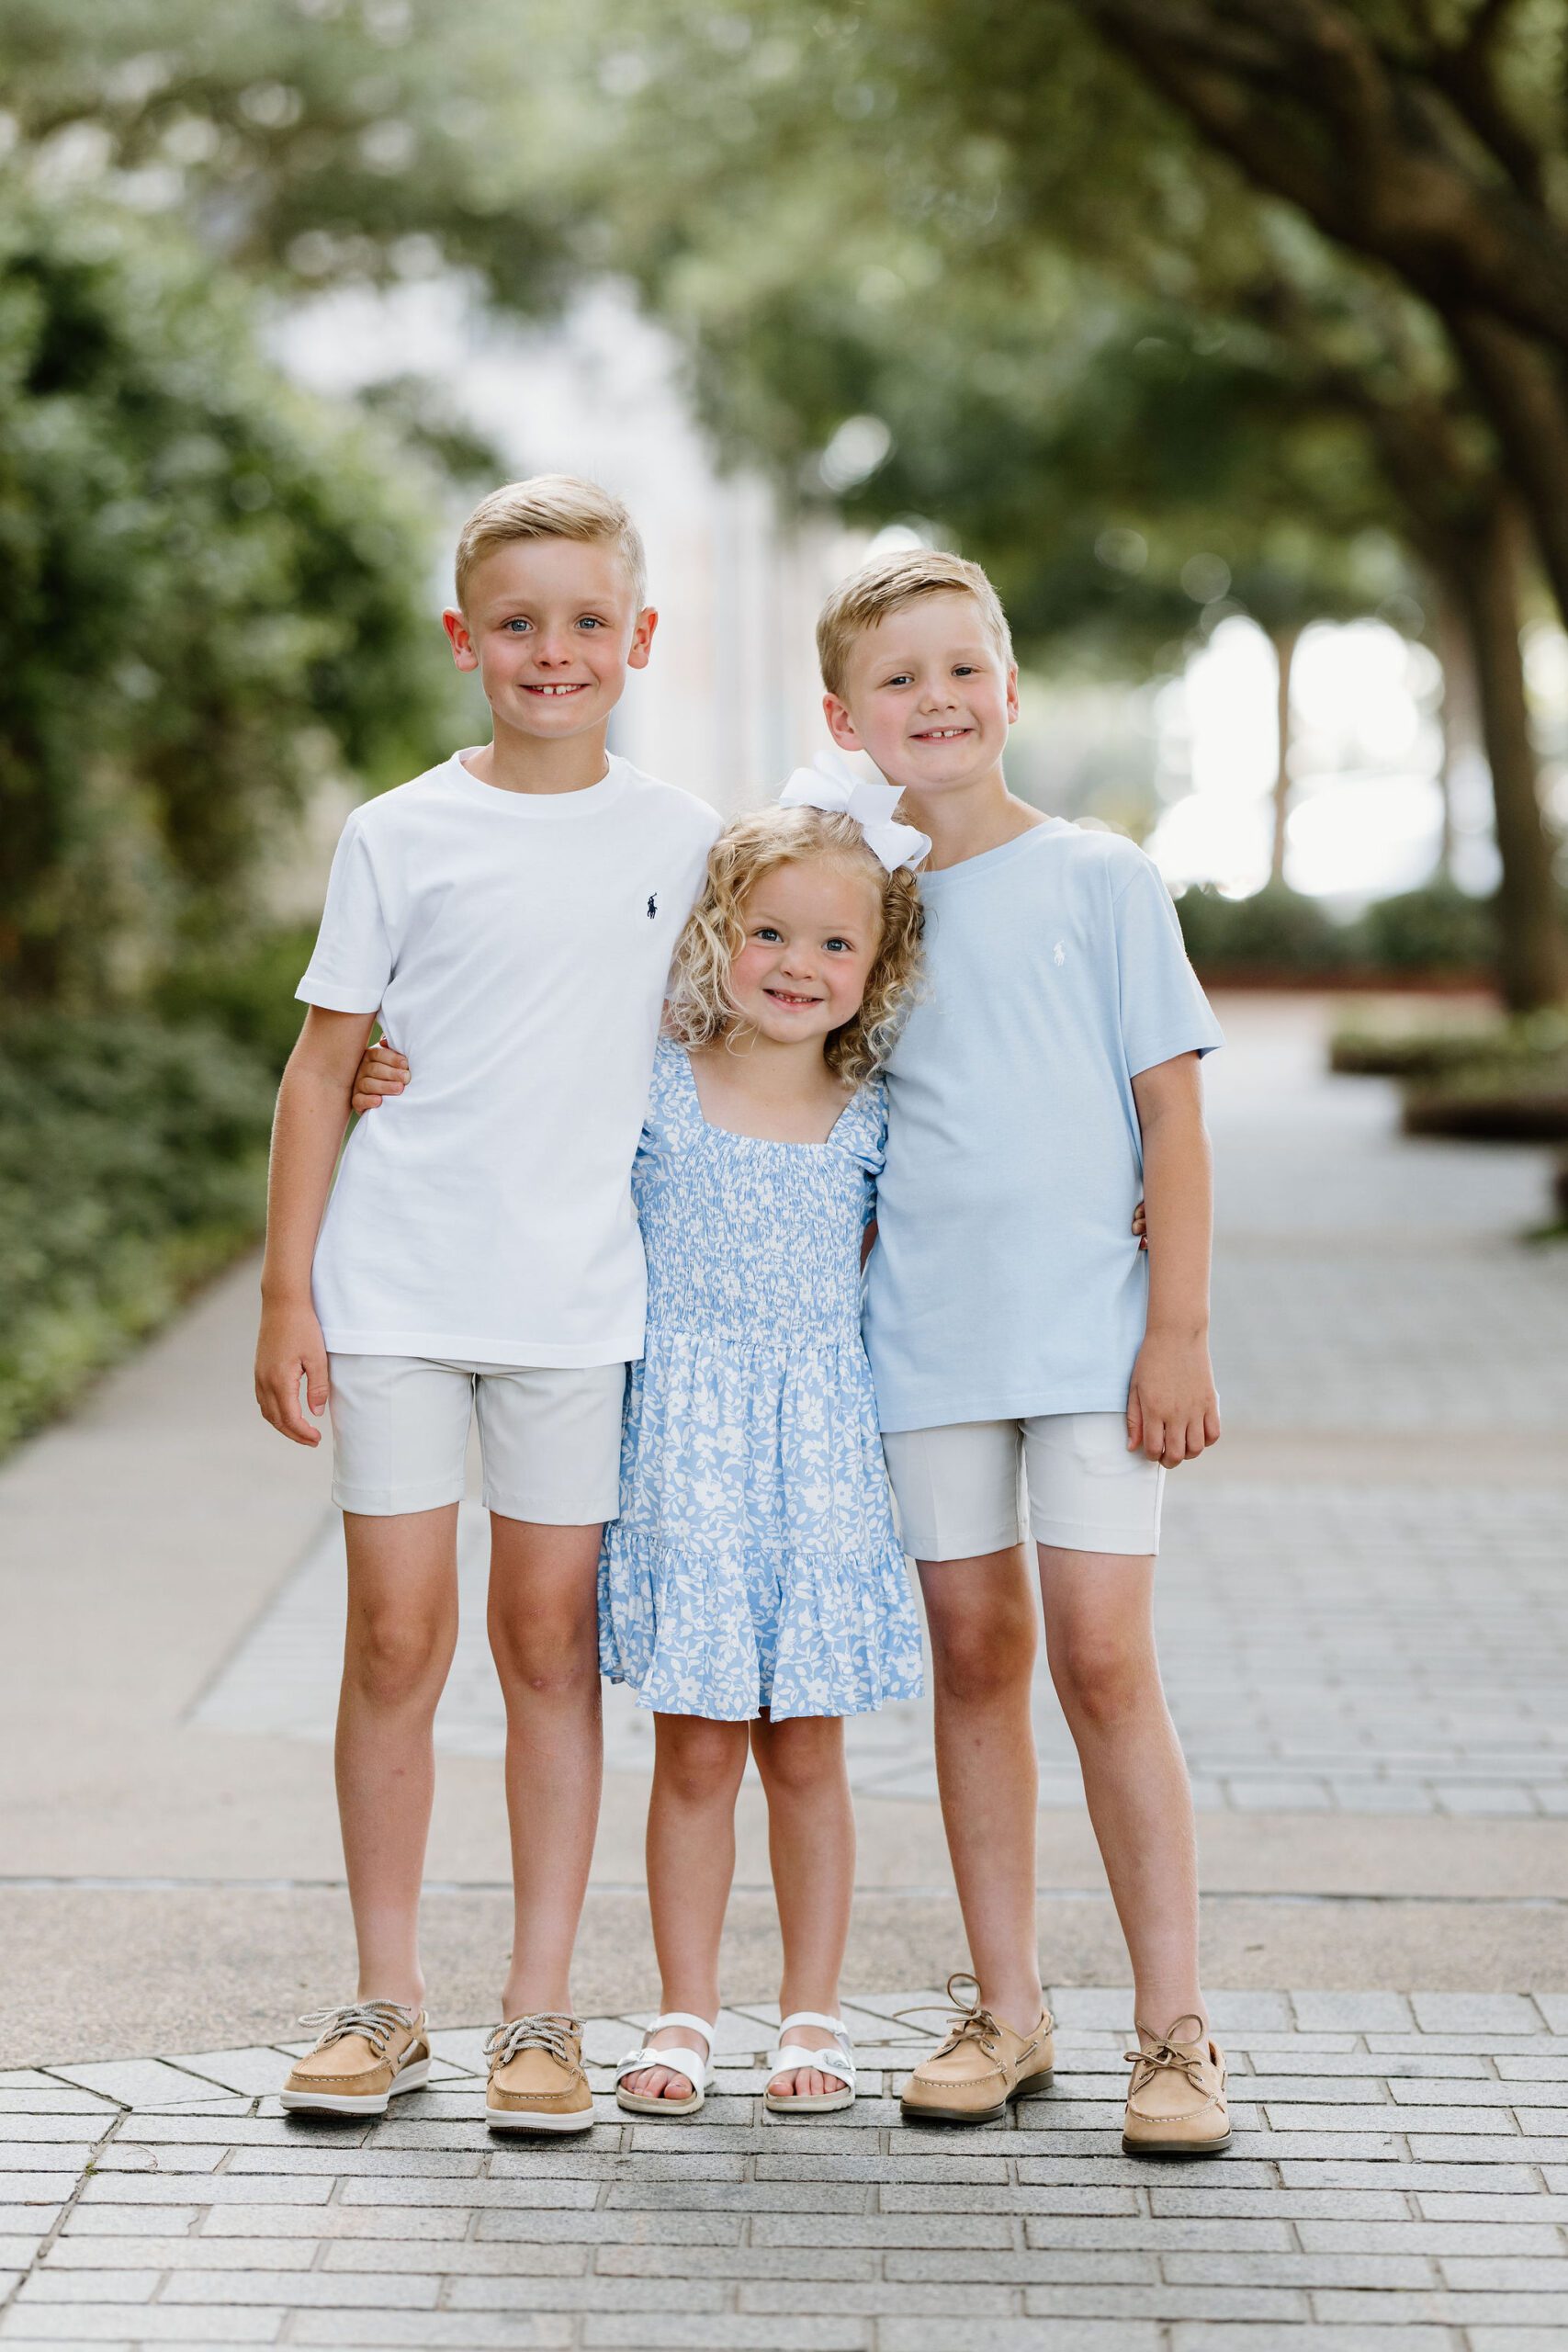 summer family portrait of 3 young siblings in coordinating white and blue outfits